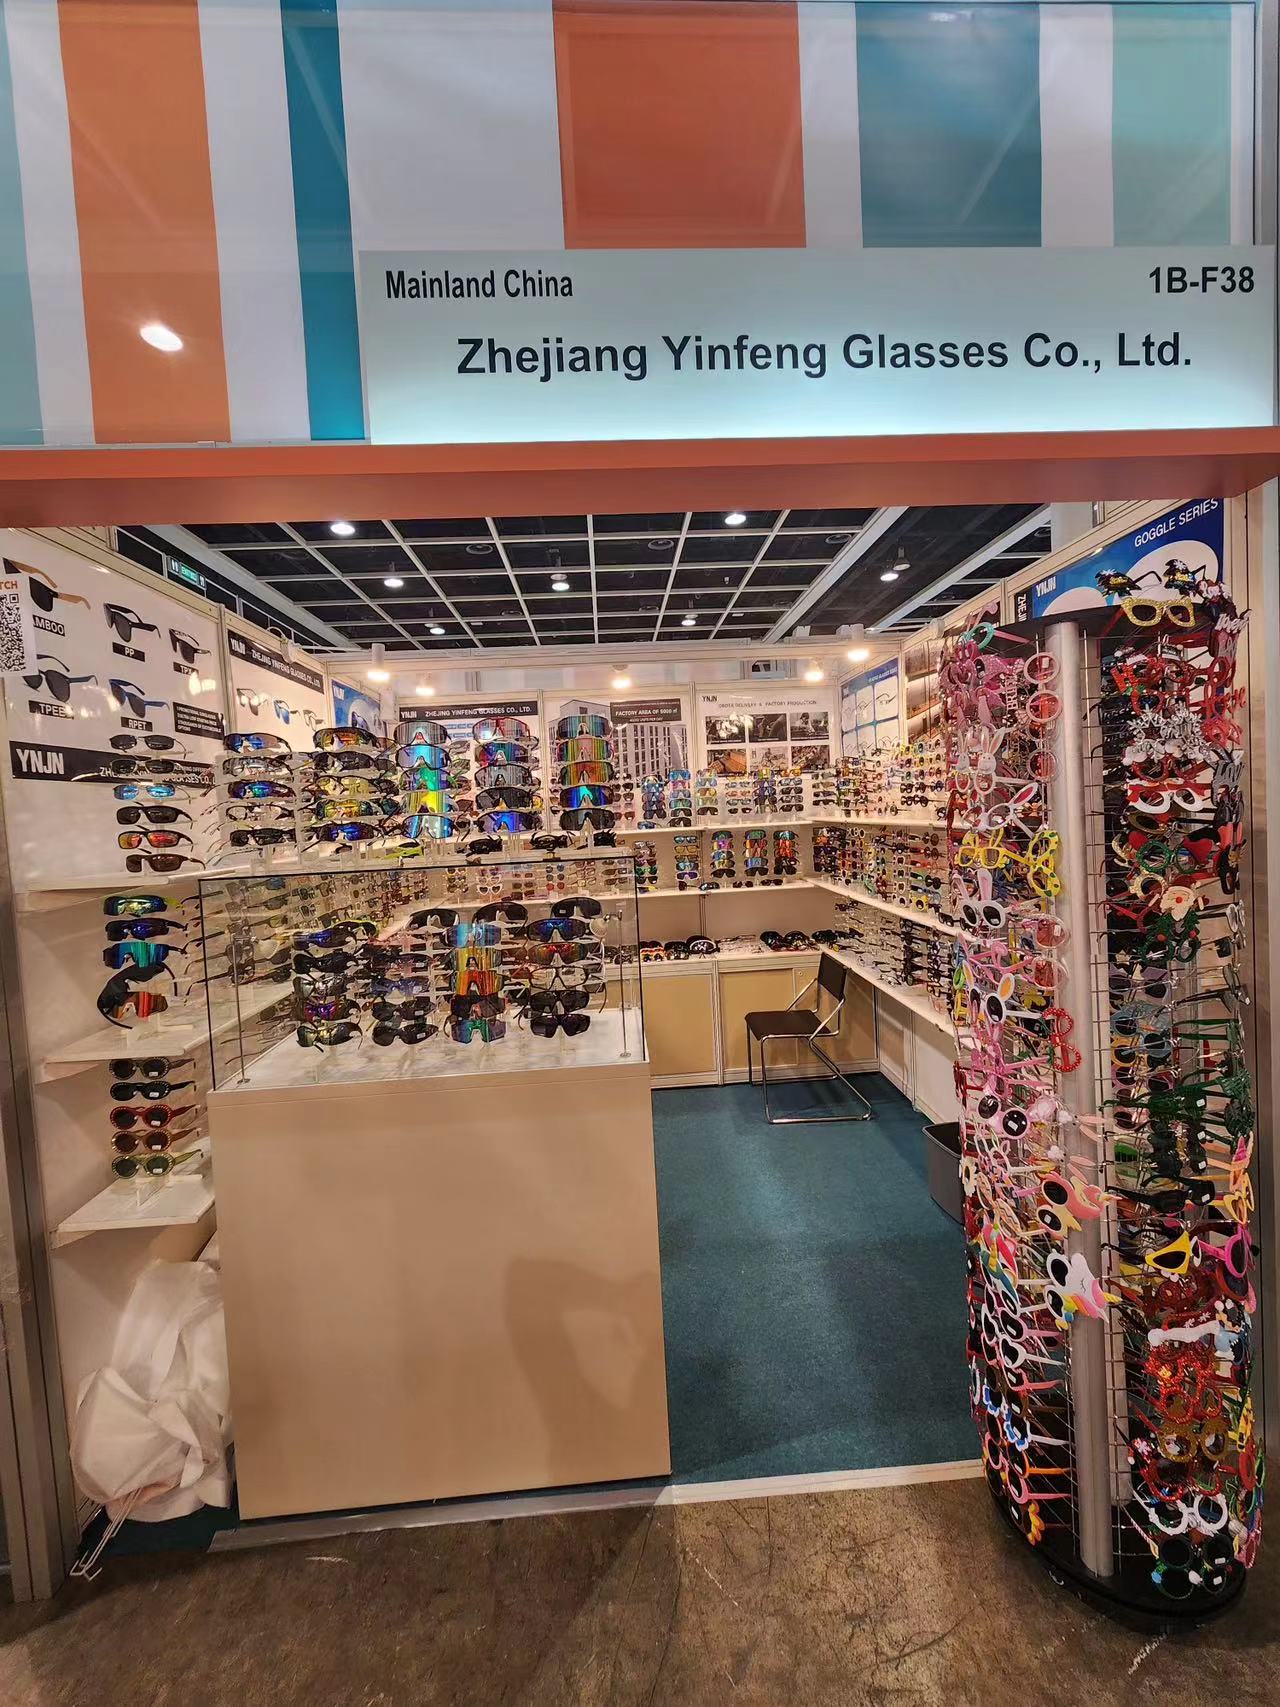 A Vision of Success: Our Eyewear Factory’s Experience at the Hong Kong Gifts & Premium Fair